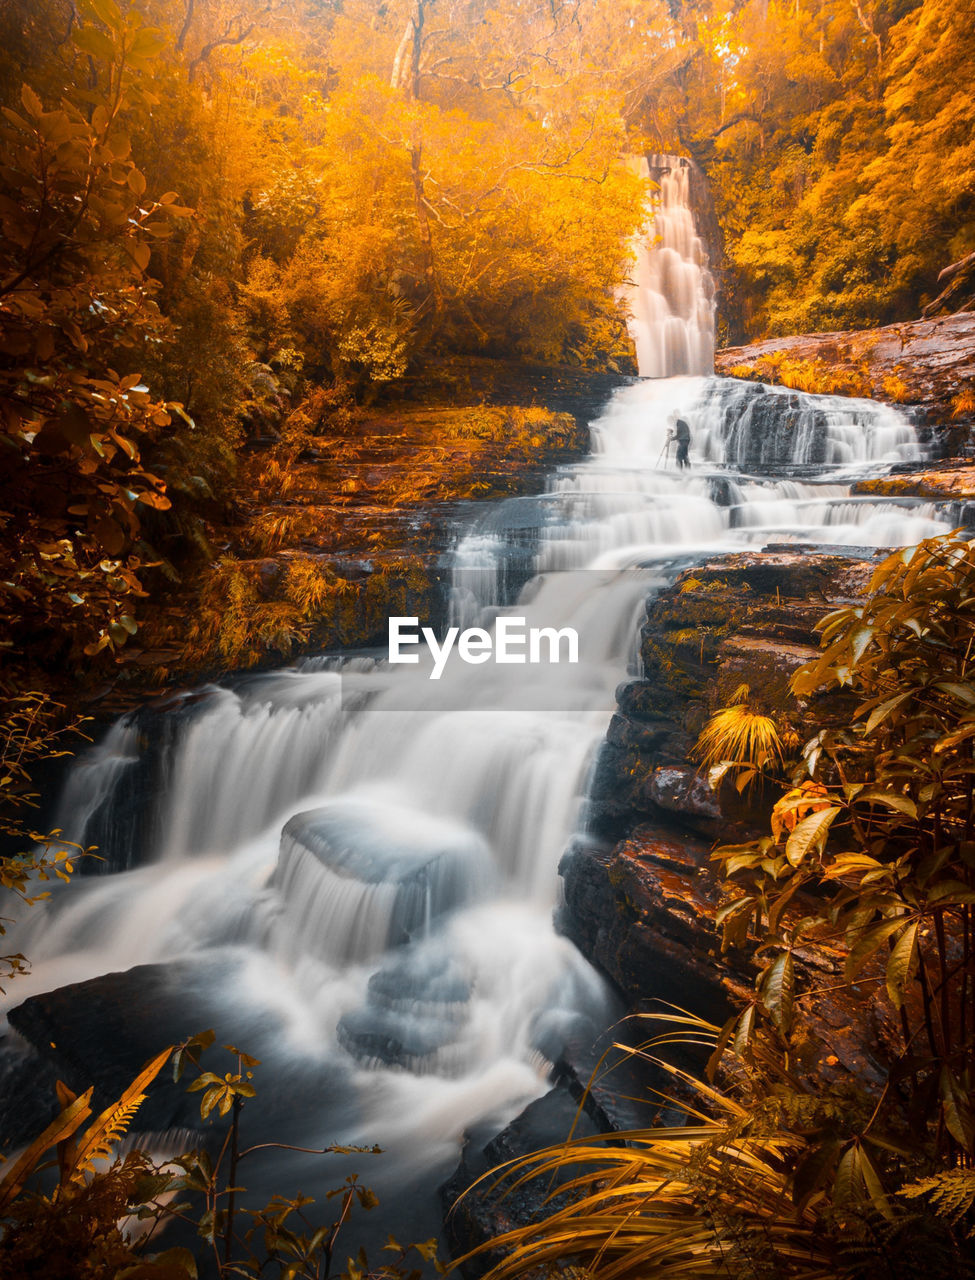 autumn, beauty in nature, scenics - nature, water, tree, nature, forest, waterfall, land, environment, leaf, plant, motion, plant part, landscape, rock, long exposure, flowing water, no people, stream, travel destinations, outdoors, non-urban scene, idyllic, river, body of water, flowing, travel, falling, fog, woodland, blurred motion, orange color, tourism, reflection, tranquil scene, tranquility, holiday, vacation